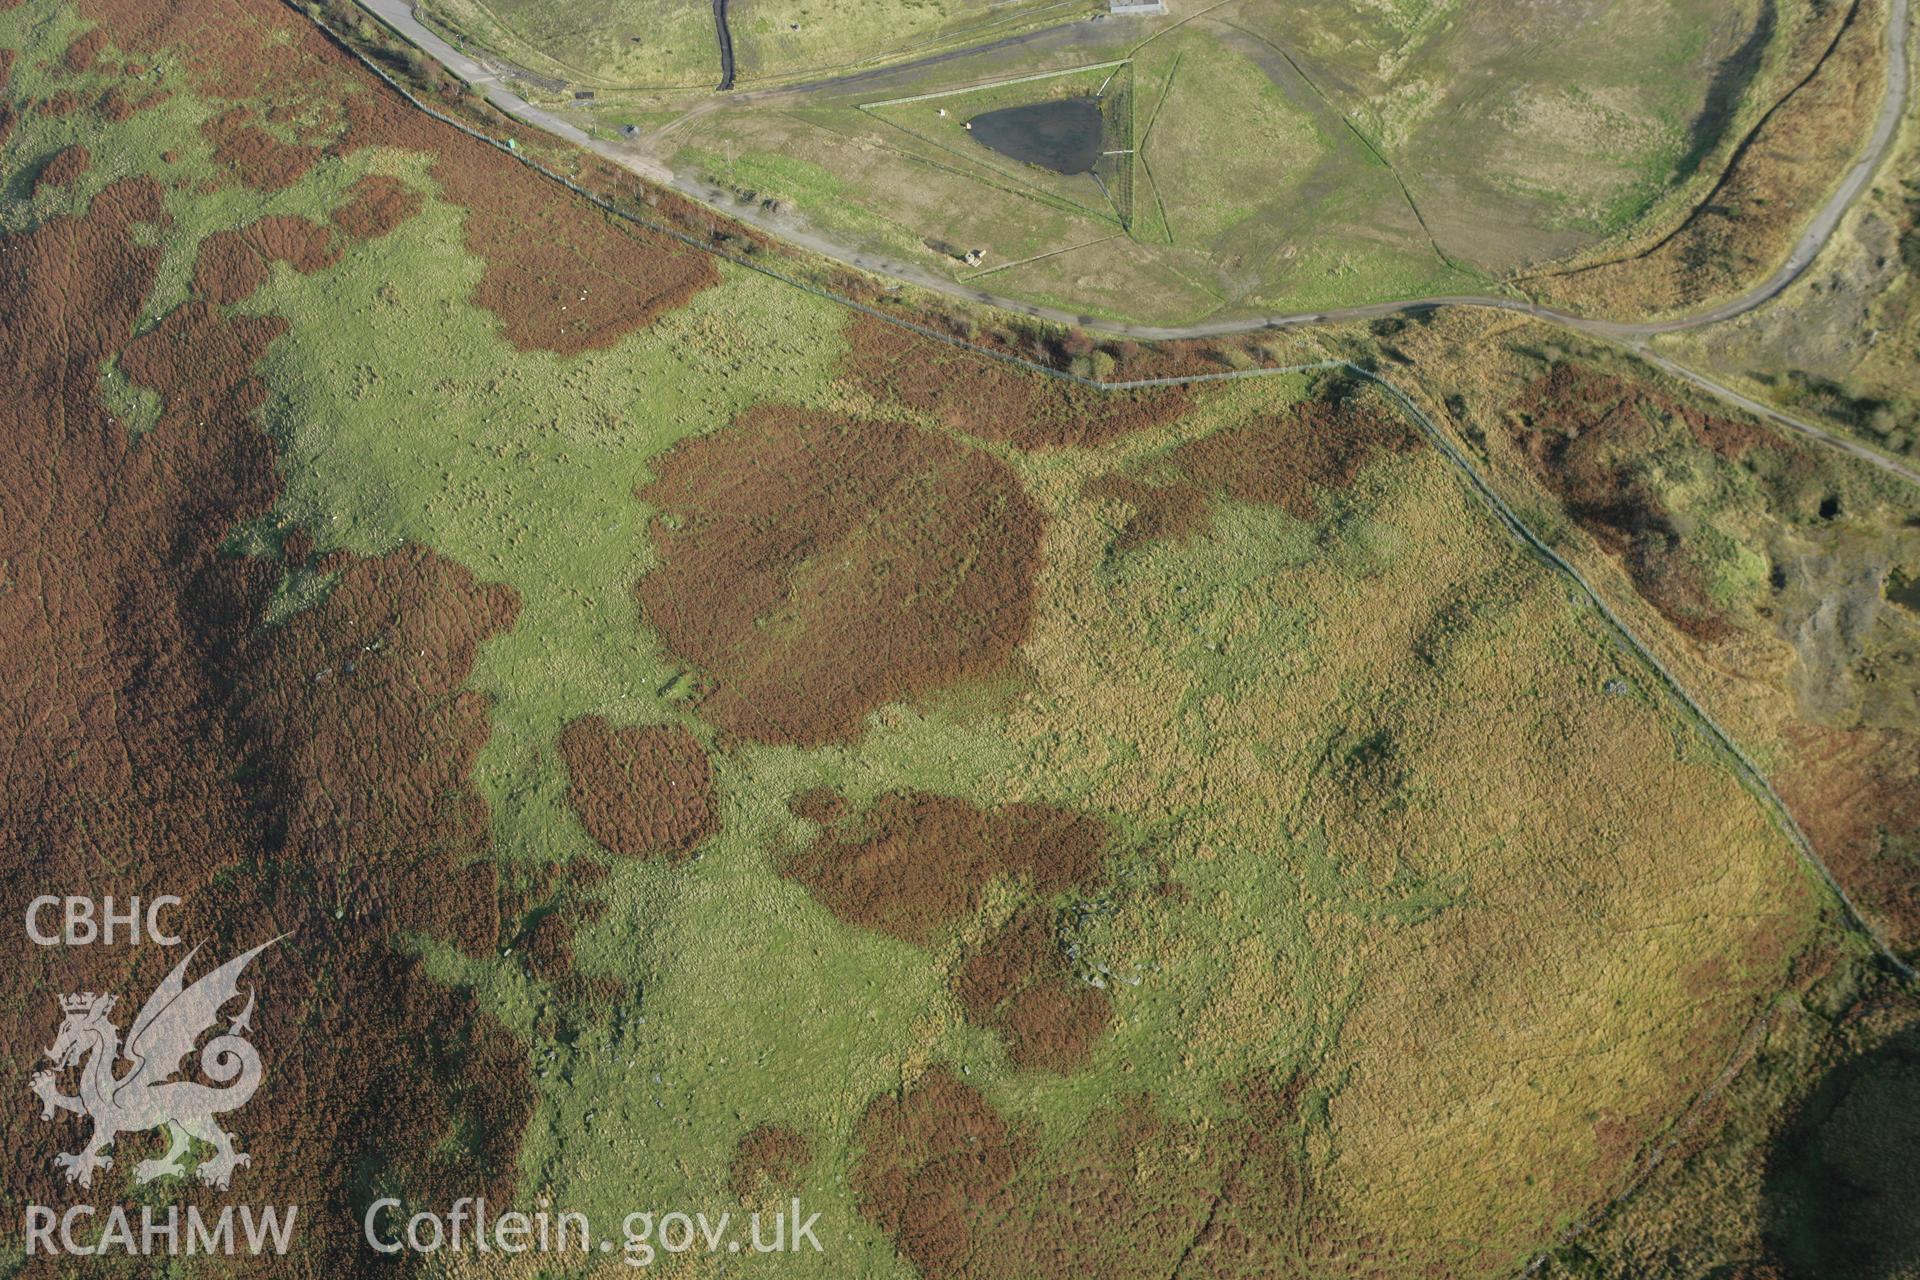 RCAHMW colour oblique photograph of Mynydd-y-Gelli Ring Cairn. Taken by Toby Driver on 16/10/2008.